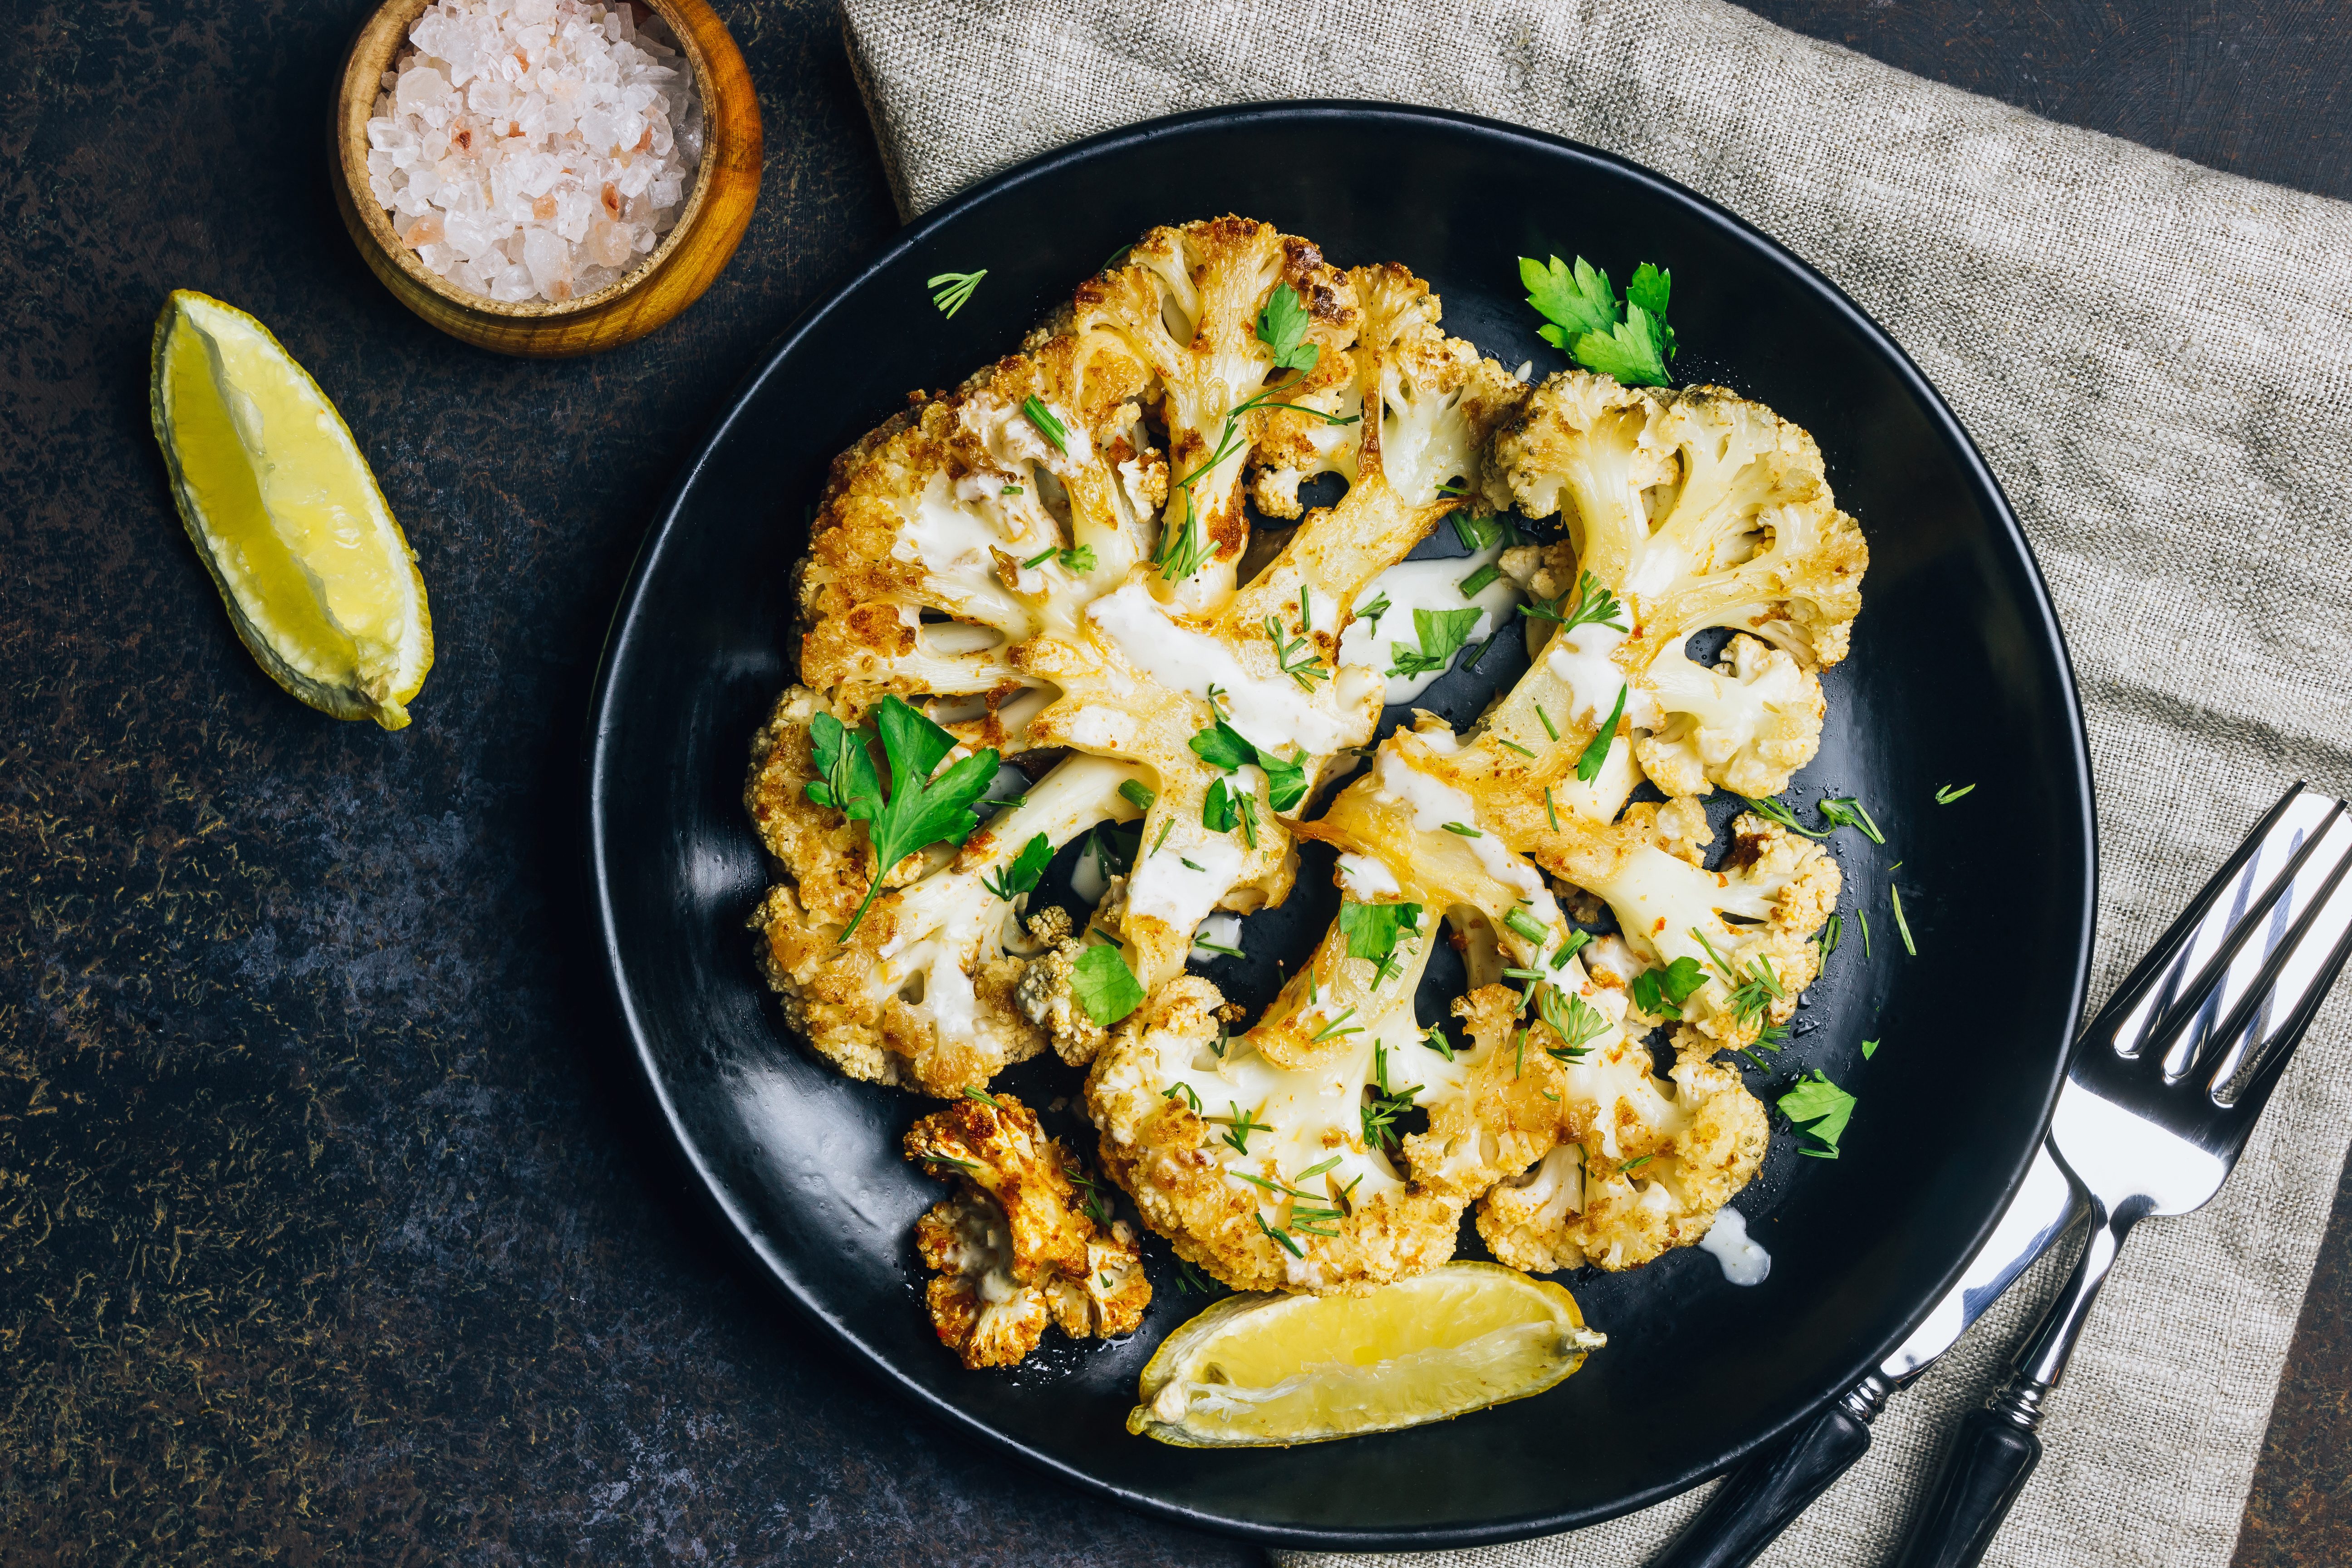 Fried cauliflower steak with greens and spices.